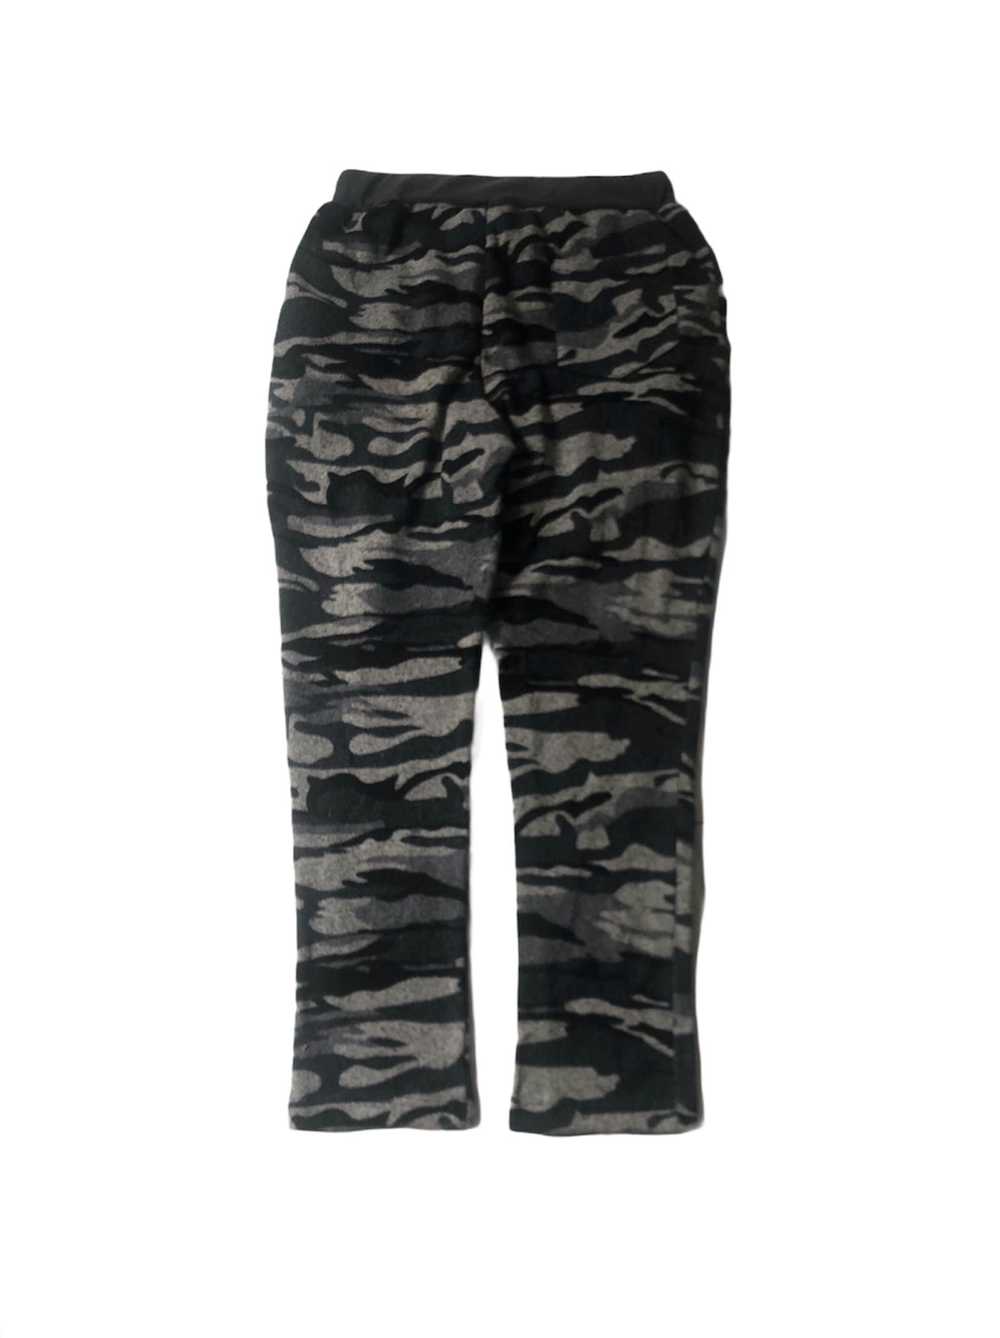 Other 🔥Military Styles Sweatpants - image 2